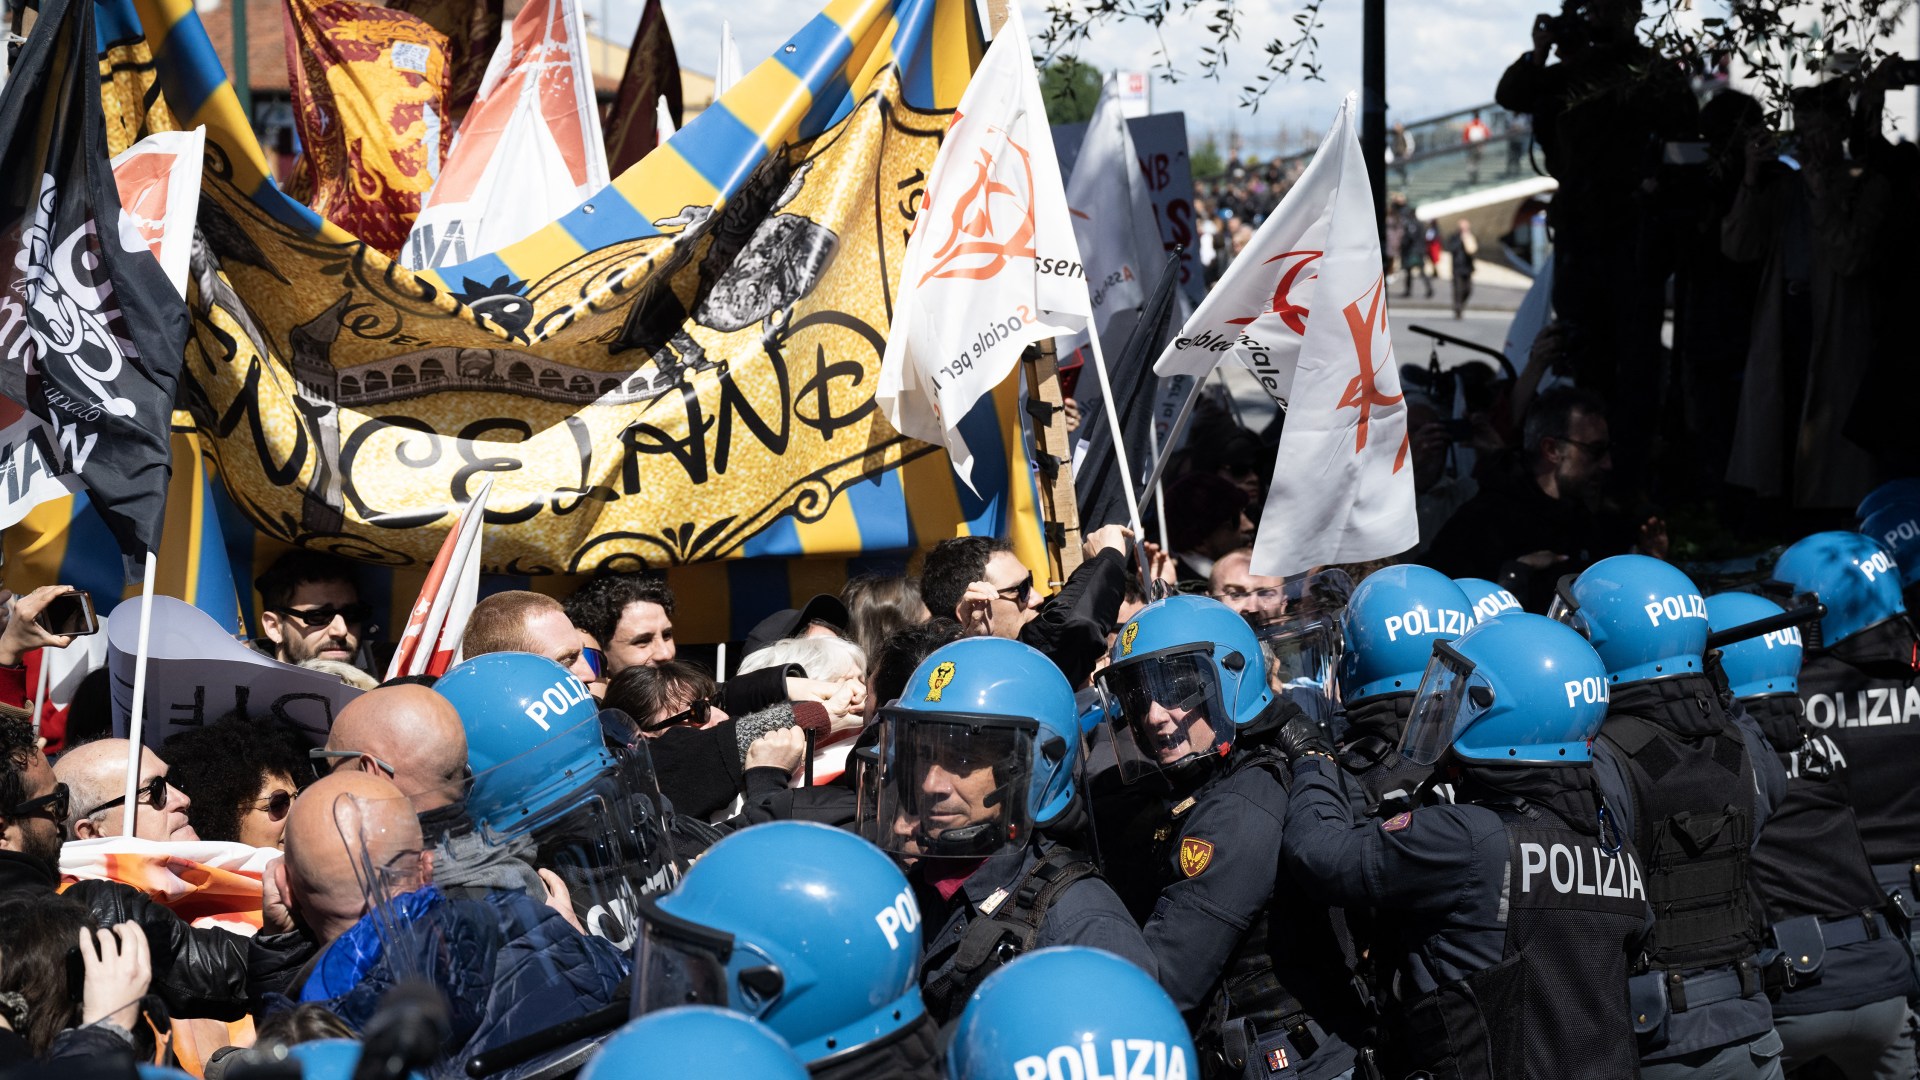 Tourist Tax Sparks Violent Protests in European Hotspot – Ex-Mayor Lashes Out